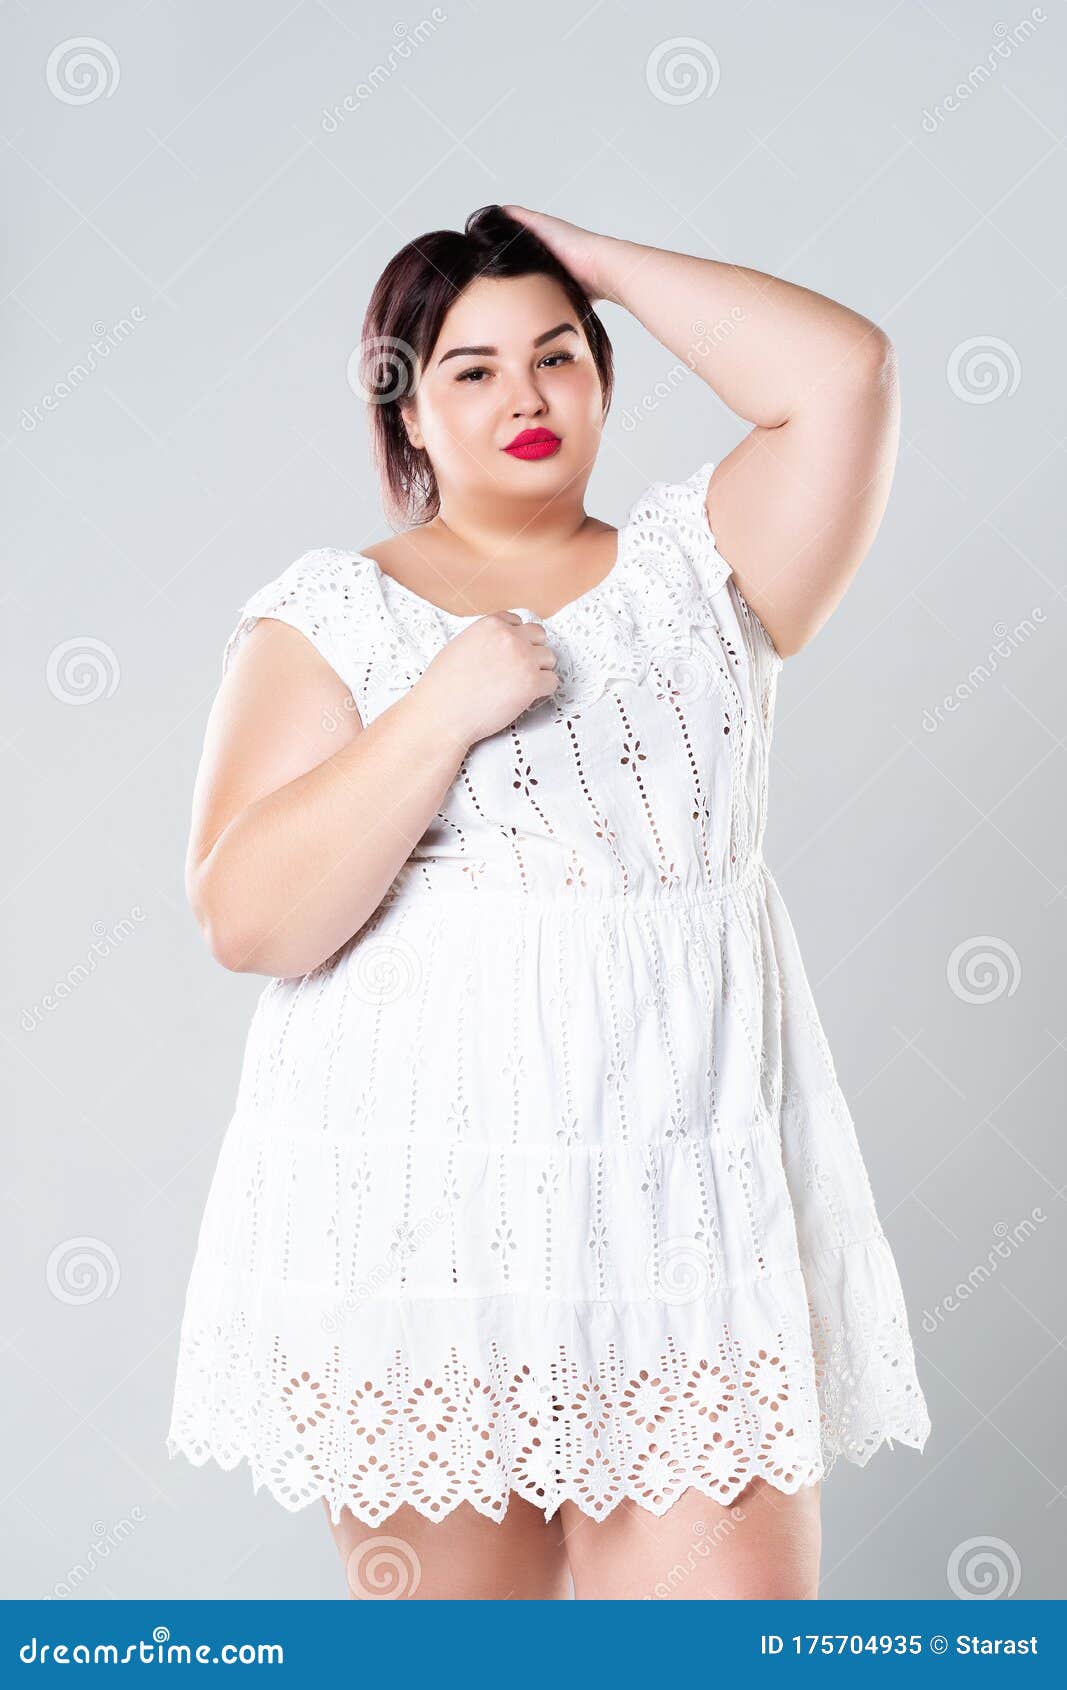 Plus Size Fashion Model In Casual Clothes Fat Woman On Gray Background